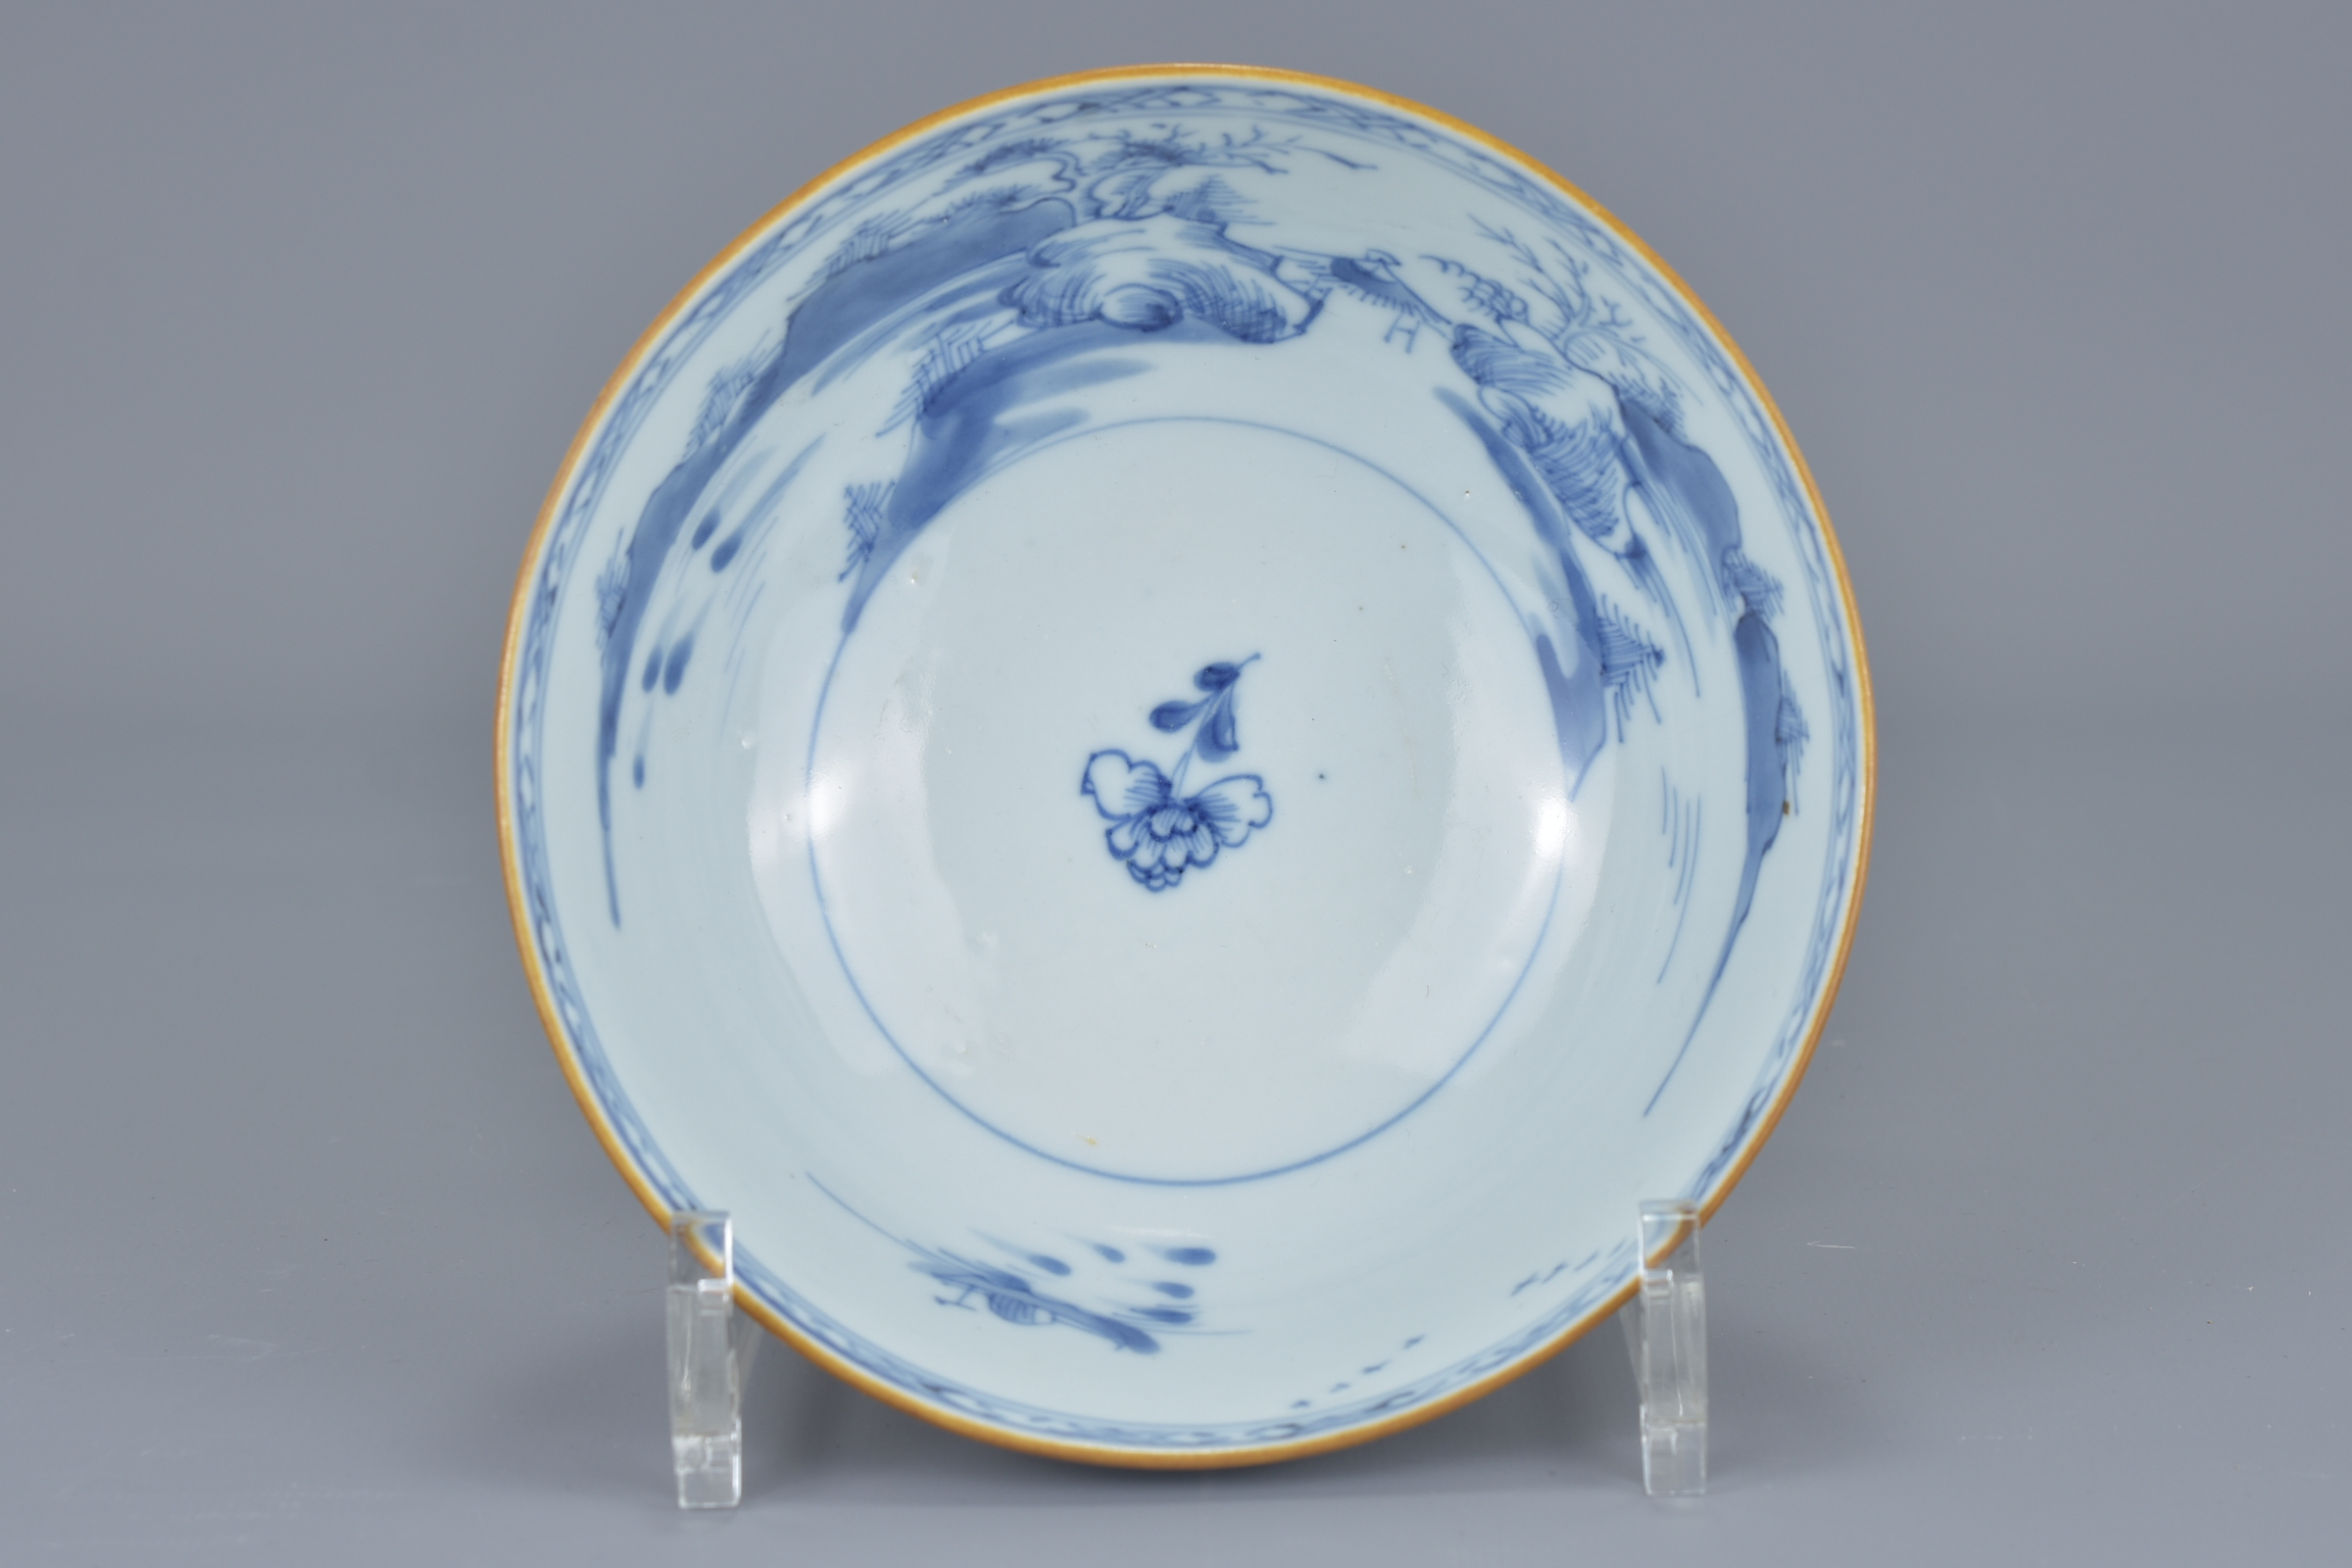 A Chinese 18th century tea-dust brown glazed export porcelain bowl with underglaze blue interior dep - Image 2 of 6